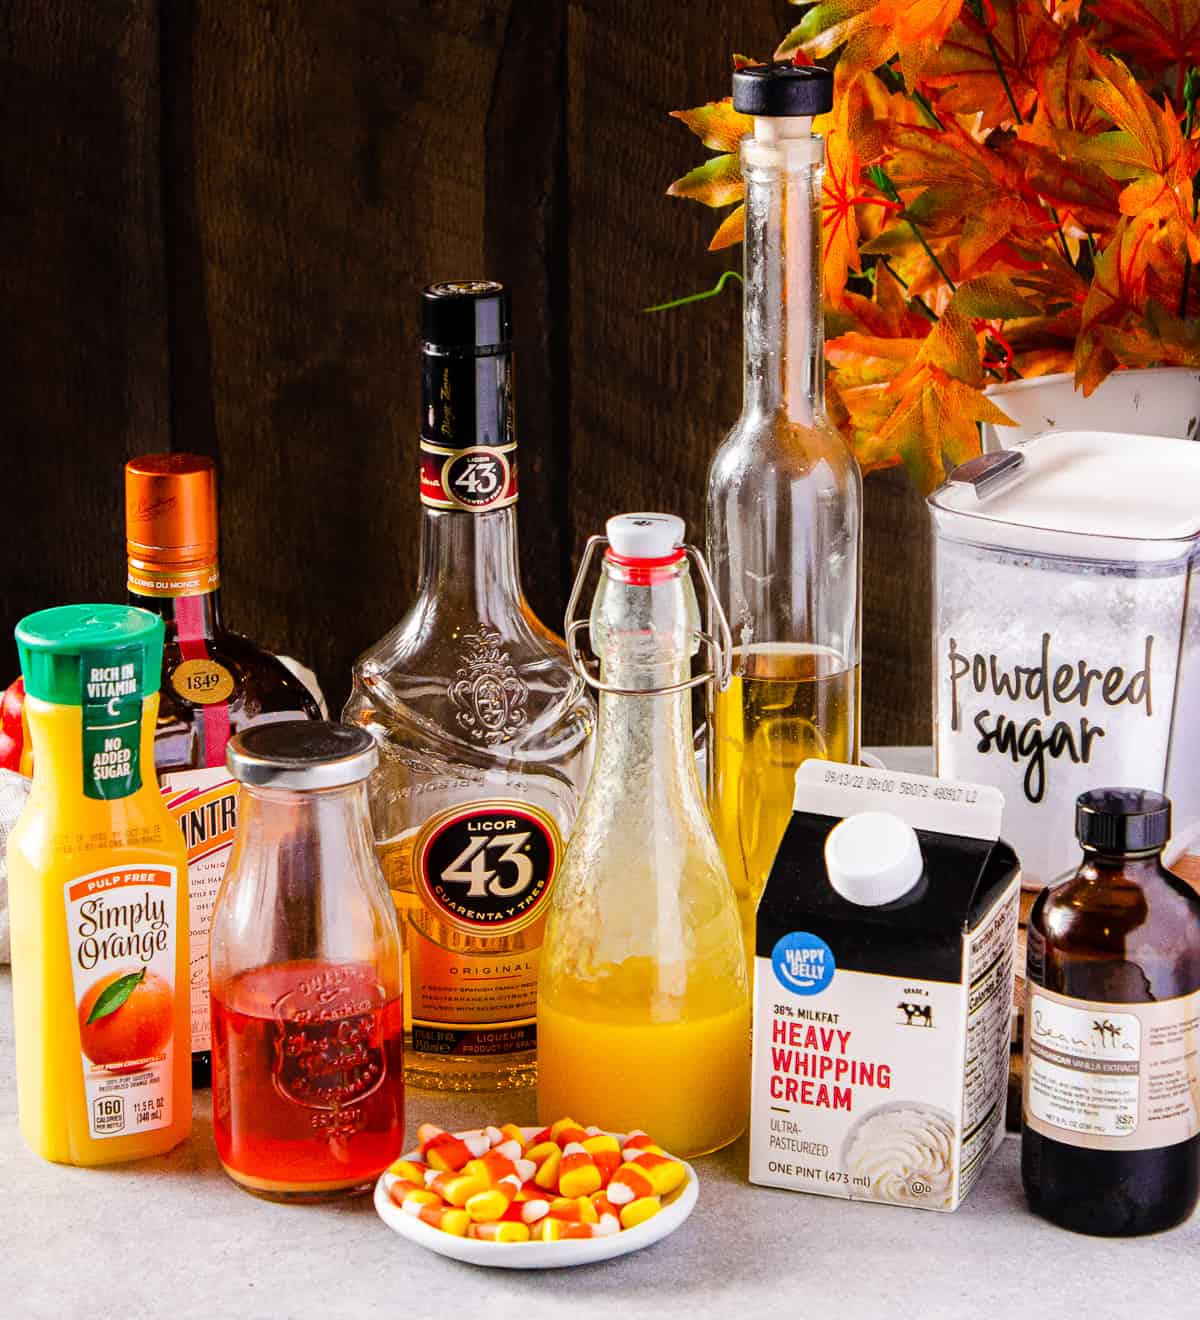 Ingredients to make a candy corn martini all together on a tabletop.